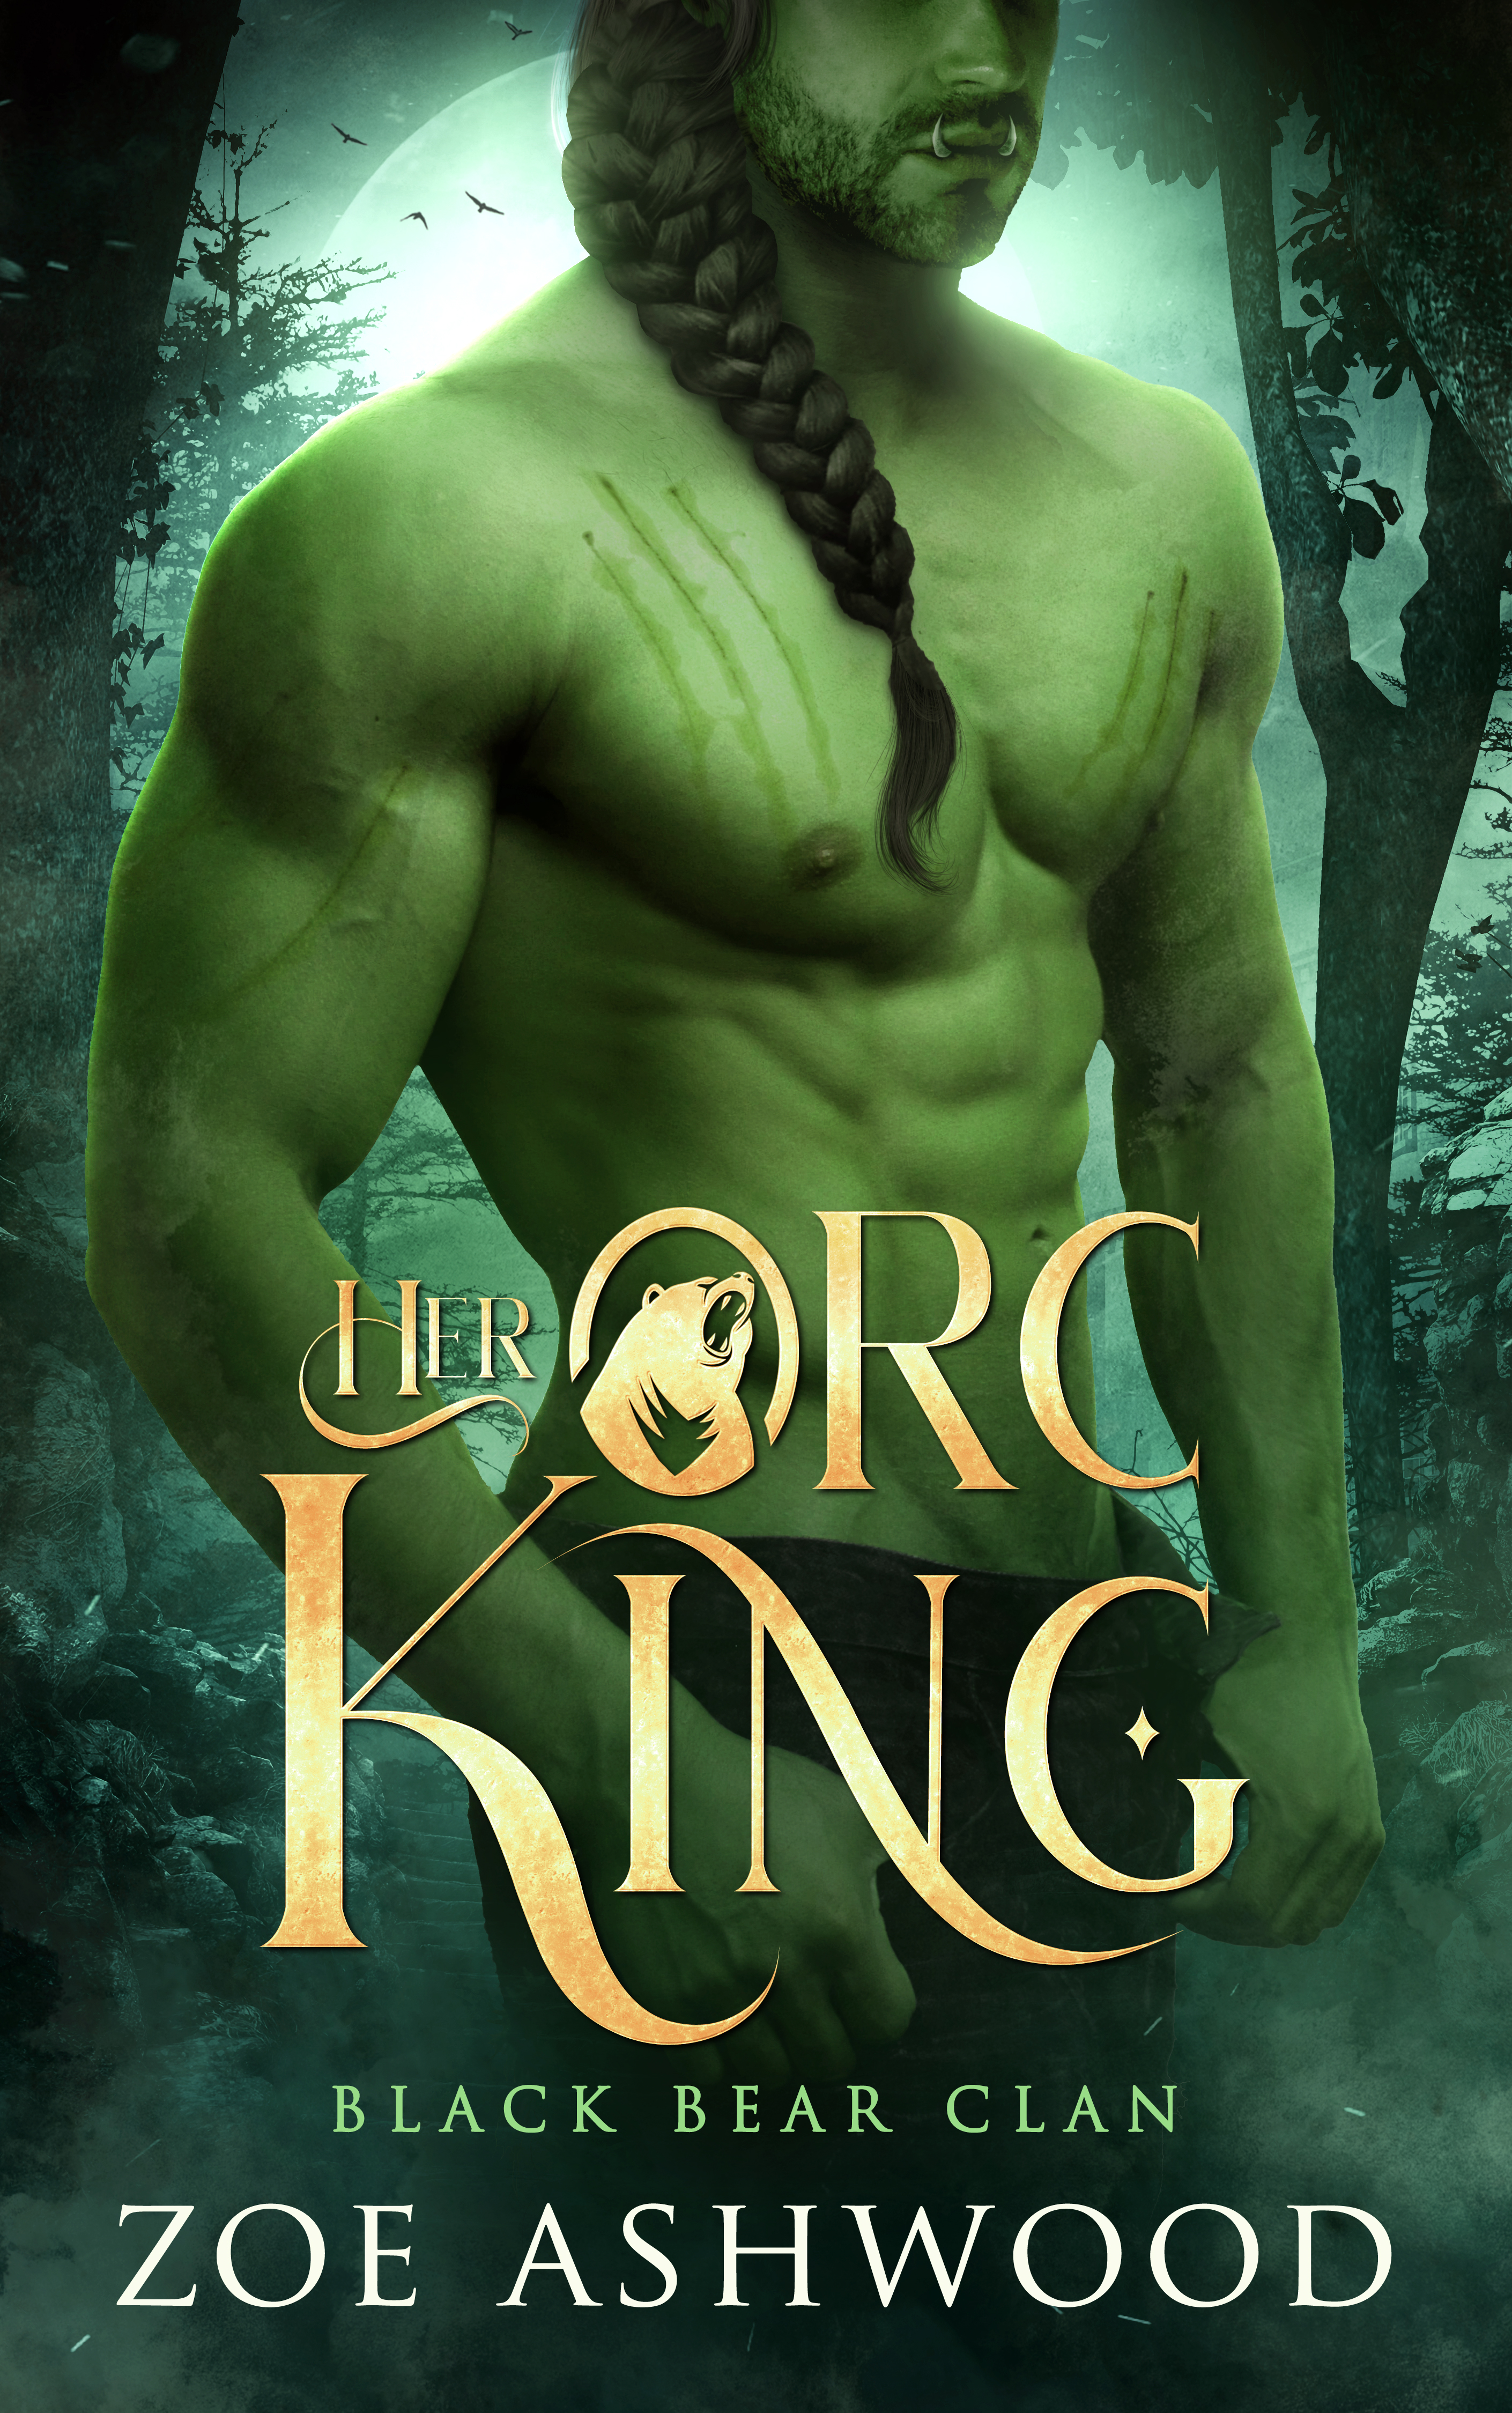 Her Orc King - by Zoe Ashwood